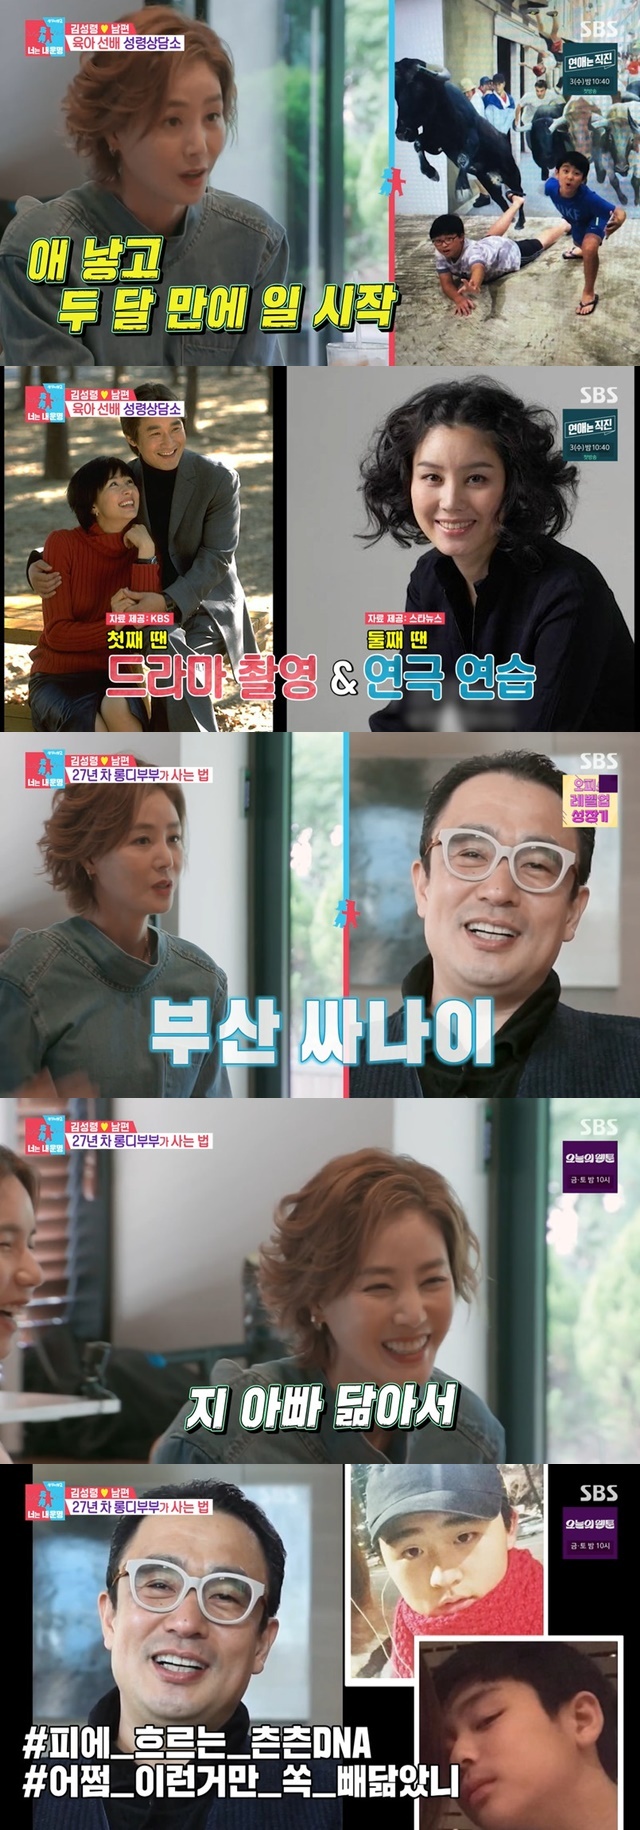 Kim Sung-ryung spoke to Park Si-eun Jin Tae-hyun about her husband and son, advising Child Birth and Child Child Childhood.On August 1, SBS Sangsangmong Season 2 - You Are My Destiny, actor Kim Sung-ryung met with Park Si-eun Jin Tae-hyun.On the day of the broadcast, Park Si-eun Jin Tae-hyun opened a daily Cafe instead of a baby shower and collected a donation for incurable diseases.Actor Kim Sung-ryung, who is acquainted with the couple, came to the scene.Kim Sung-ryung presented a foot massager for Park Si-eun and paid 1 million won for Donation, as well as transformed into a passionate daily alba and conveyed a warm heart.Kim Sung-ryung told Park Si-eun, who gained 9kg weight due to pregnancy, I am 24kg. I went 70kg.I had everything I wanted to eat, he said, but I had a baby at 35. I had a baby late.Park Si-eun wanted only natural delivery at the age of 43, and Kim Sung-ryung said, I can do it, I do not have to force it. First, I had labor for over 20 hours.I barely got out of my pelvis, but my head was crushed. I said Id come back.The doctor surprised Park Si-eun by saying, The male teacher came up on top and pressed me to come out. (On the stomach) bruised.Lee Hyun said, Two female nurses ride in and push them away. This is a modern hospital, primitive birth? I thought. What are you doing?I also looked back at my Child Birth experience. When Jin Tae-hyun asked, Is not it sick? Lee Hyun said, It hurts.I wanted it to go quickly because everything was sick. Kim Sung-ryung said, I booked a family delivery room and even filmed a video.My husband took a video, talked to the doctor, and filmed everything I was sick. Jin Tae-hyun said, Some of my acquaintances do not want to enter the delivery room.Im looking for blood, too.Kim Sung-ryung asked, Do you want to go in? Jin Tae-hyun replied, I want to go in and be with you.Kim Sung-ryung read Jin Tae-hyuns tendency, saying, It is more than 100% in tendency, and it is laboring together.Some men say that, Kim said, when were married, were told that theres something like that. Some of them are.Kim Sung-ryung said, I want to raise my child these days. Its time to have a grandchild. I worked two months after having a baby.The first was a drama in two months and the second was a play practice. Plays first performance was a baby day.I want to raise him and I want to help him. 